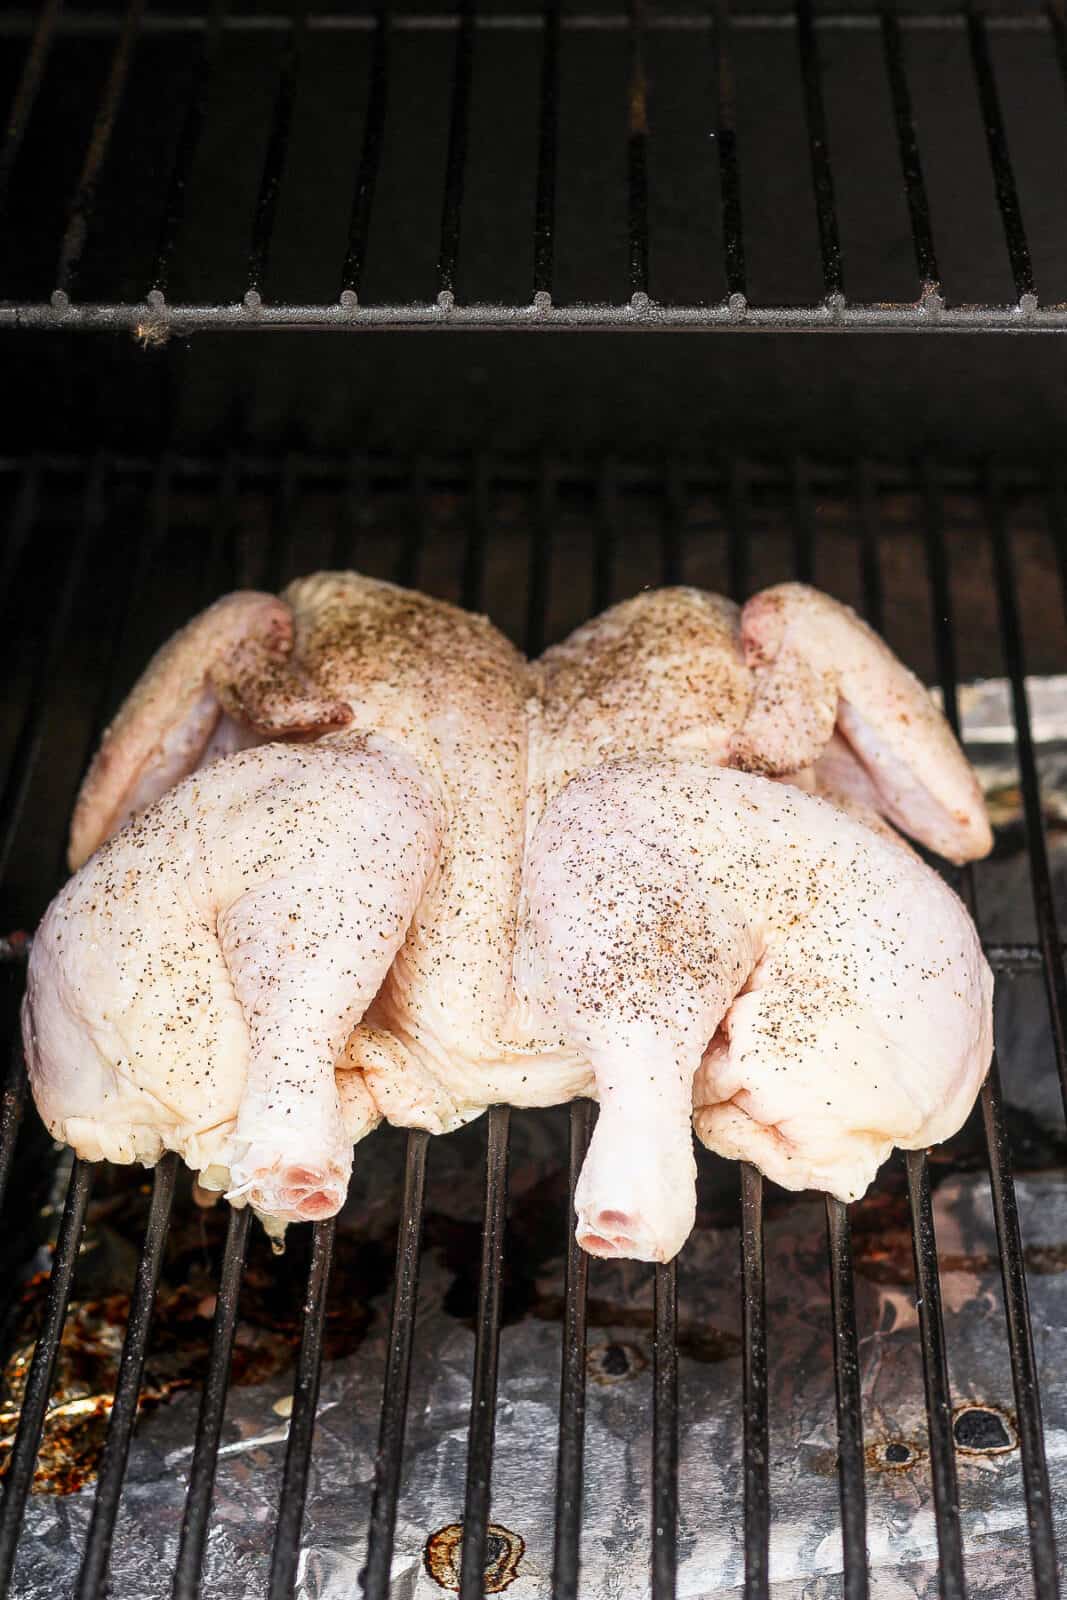 A spatchcock chicken on the smoker, still raw.